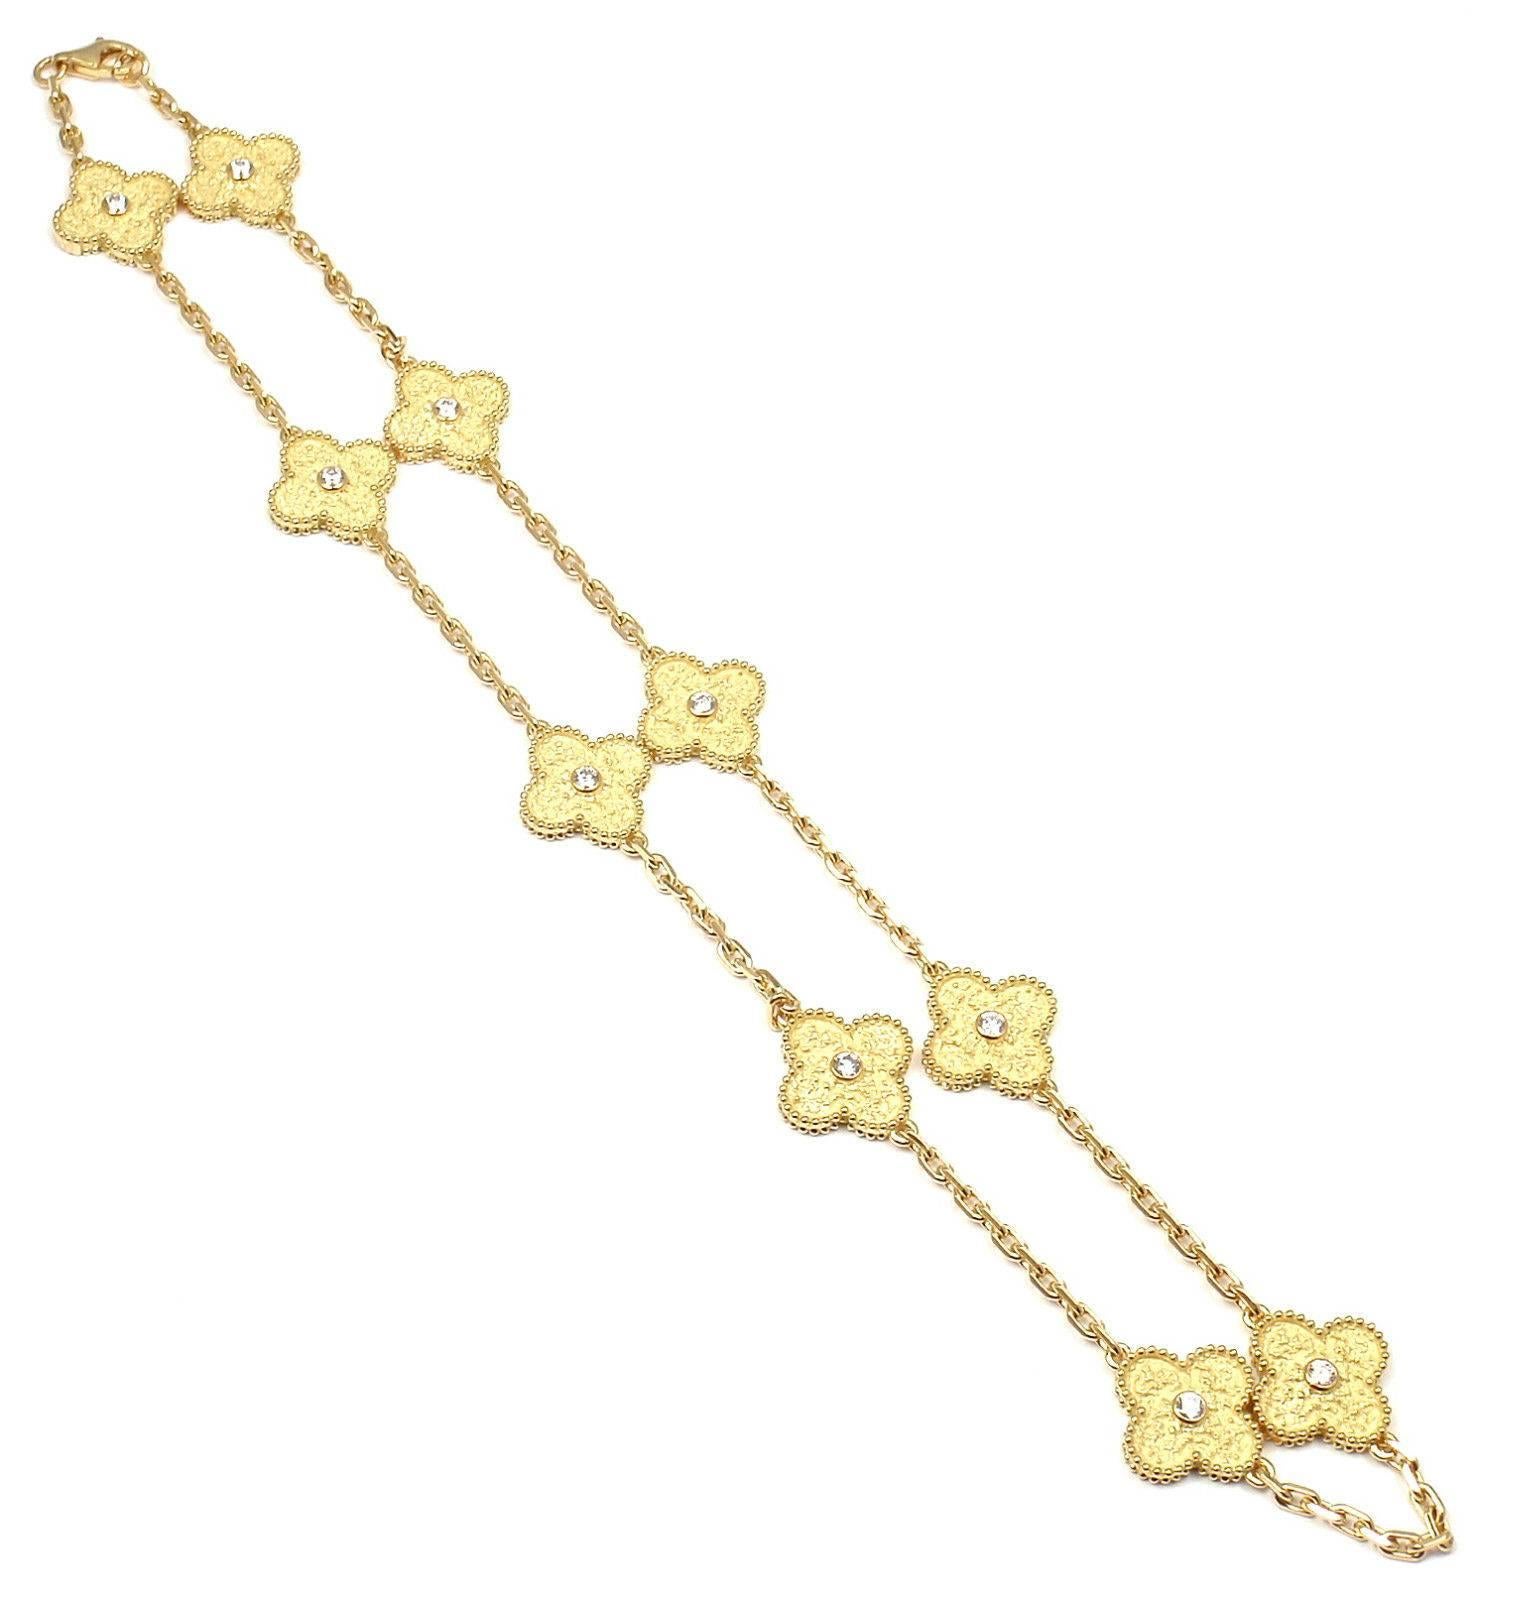 18k Yellow Gold 10 Motif Diamond Vintage Alhambra Necklace by Van Cleef & Arpels.
With 10 round brilliant cut diamond VVS1 clarity, 
E color total weight .60ct 
This necklace comes with Van Cleef & Arpels service paper from VCA store in